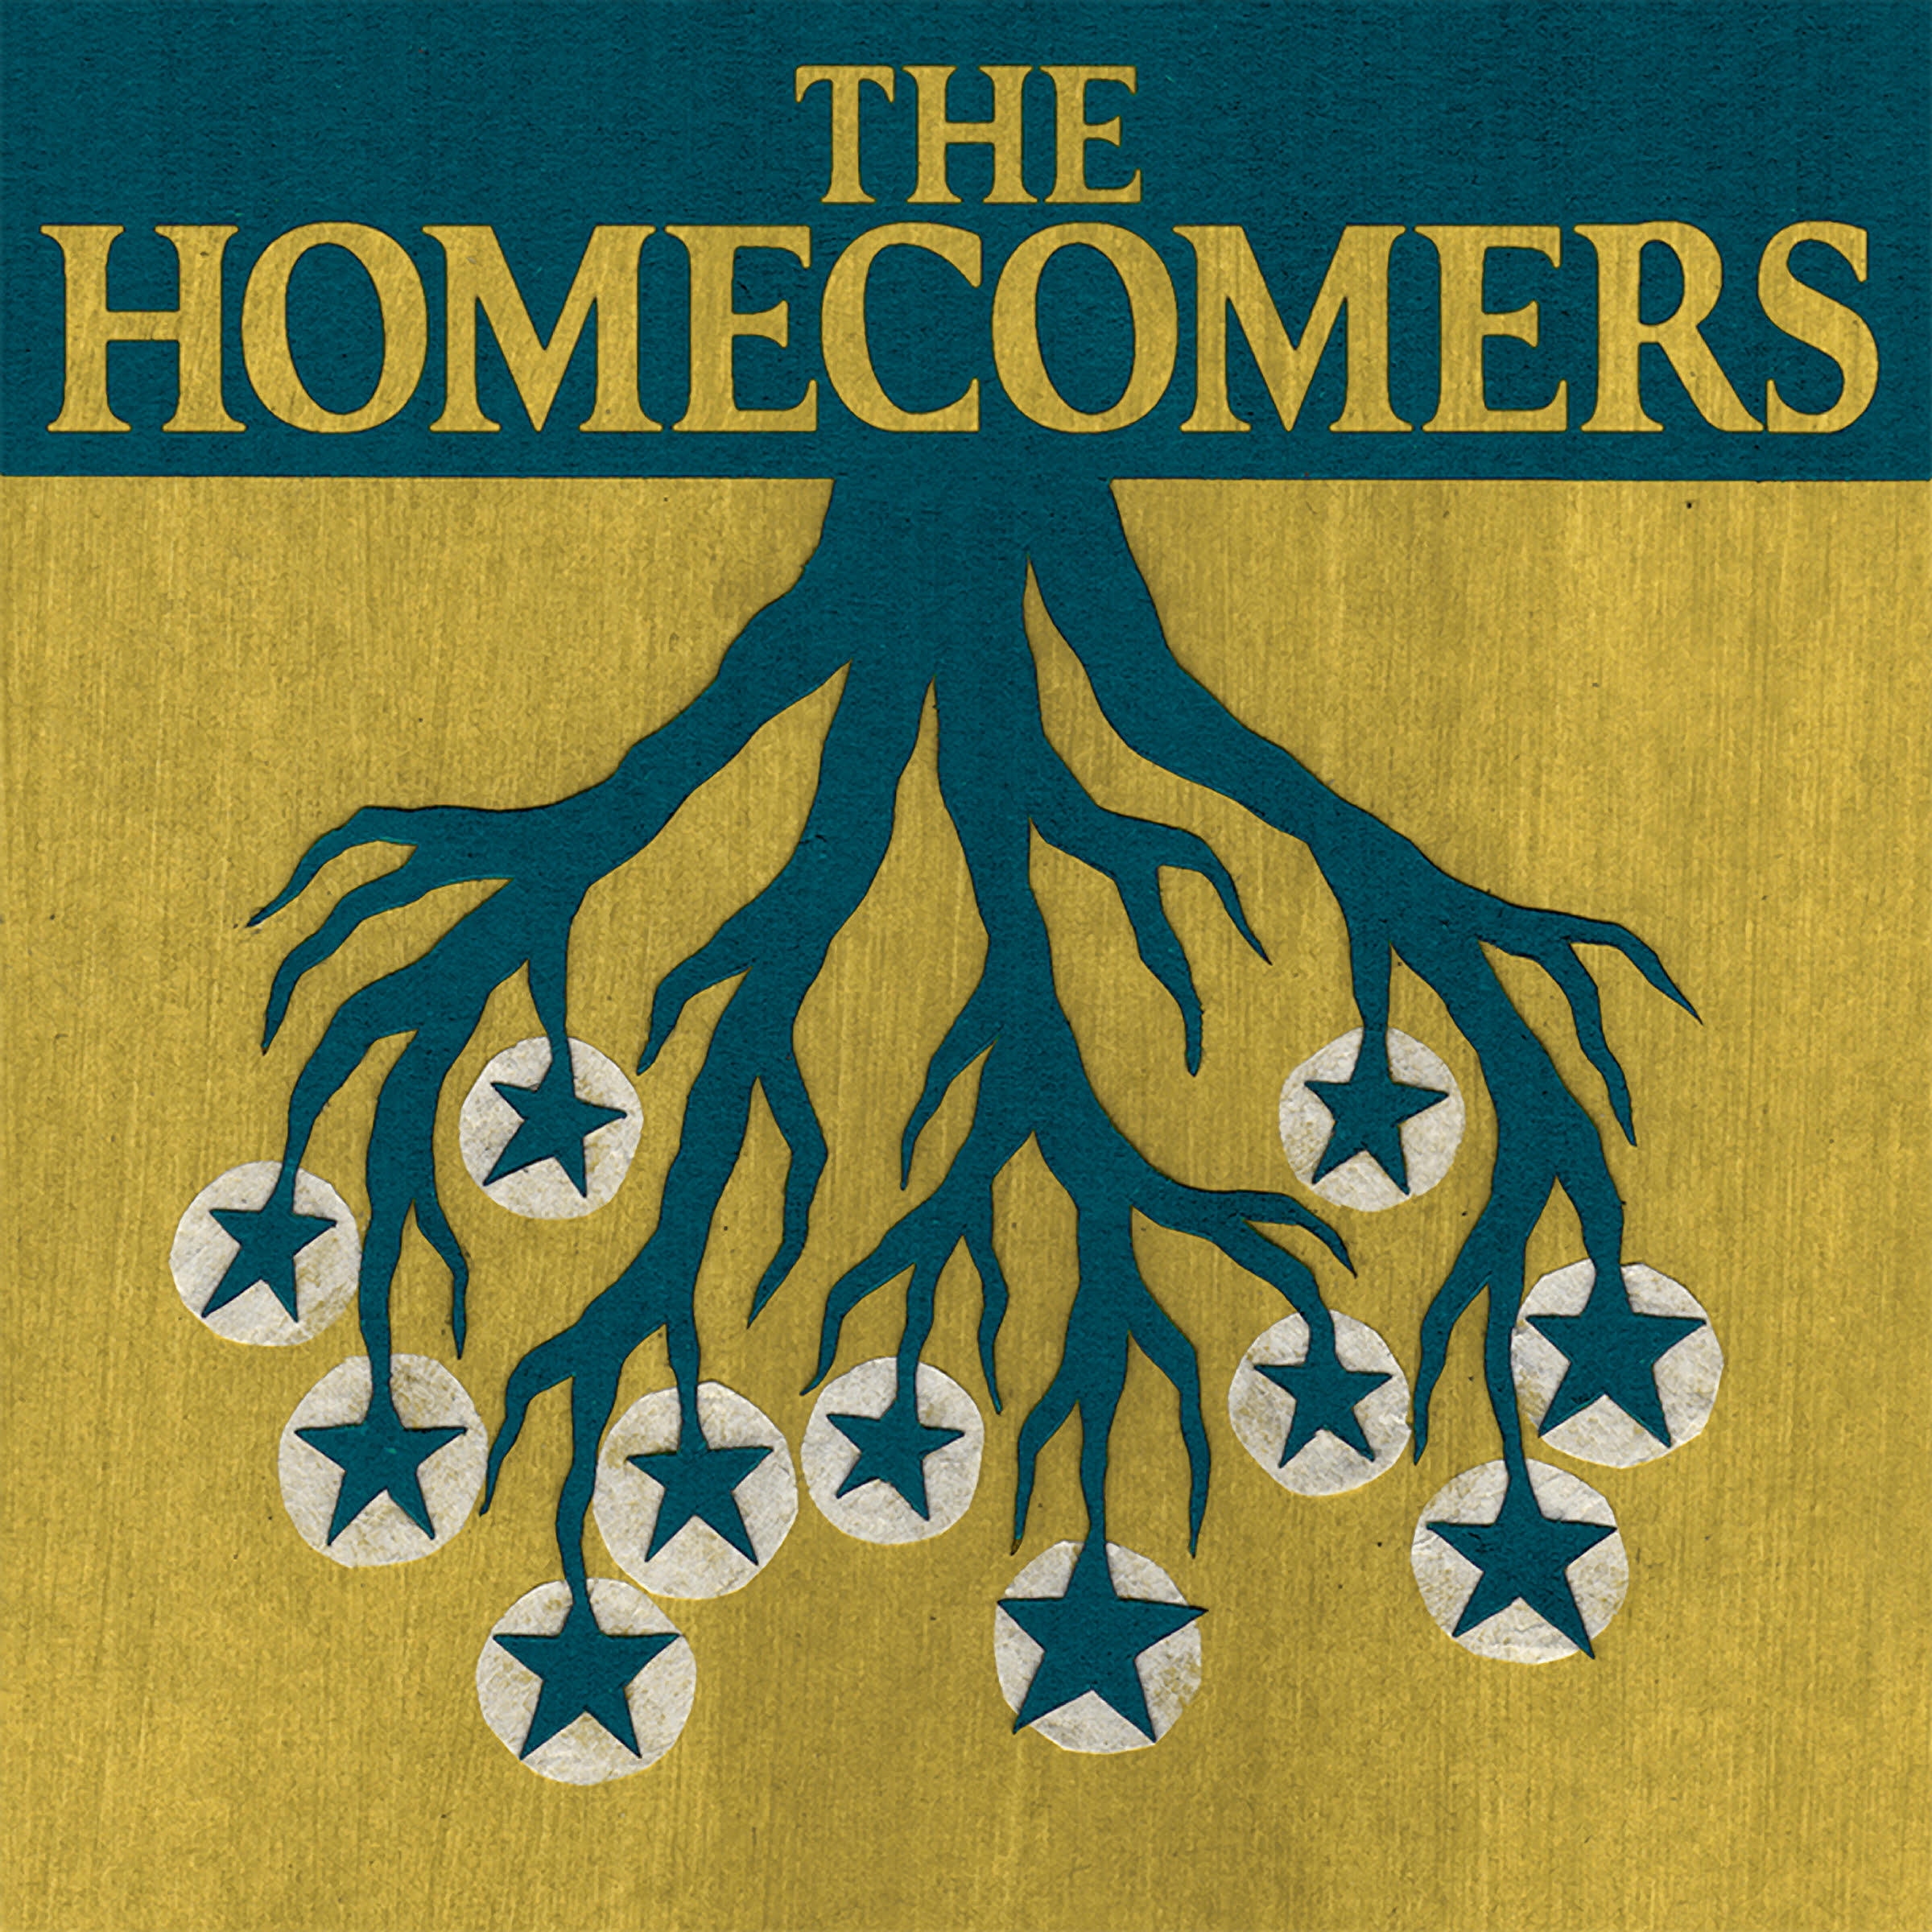 The Homecomers